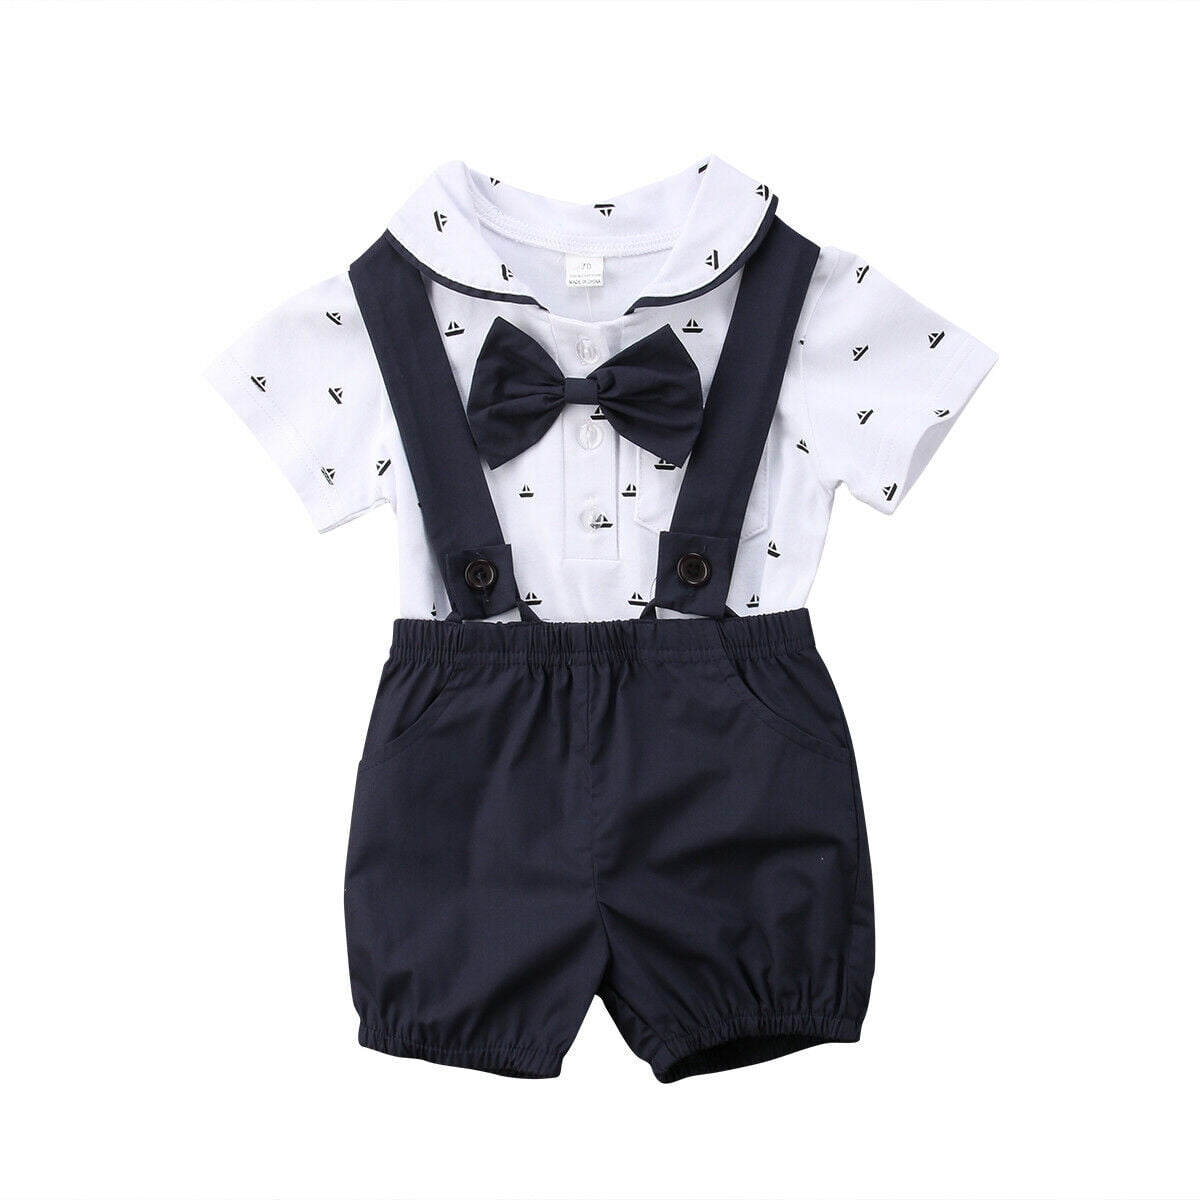 Strappy Shorts Clothes Outfits Set 2PCS Newborn Baby Boy Gentleman Romper Tops 